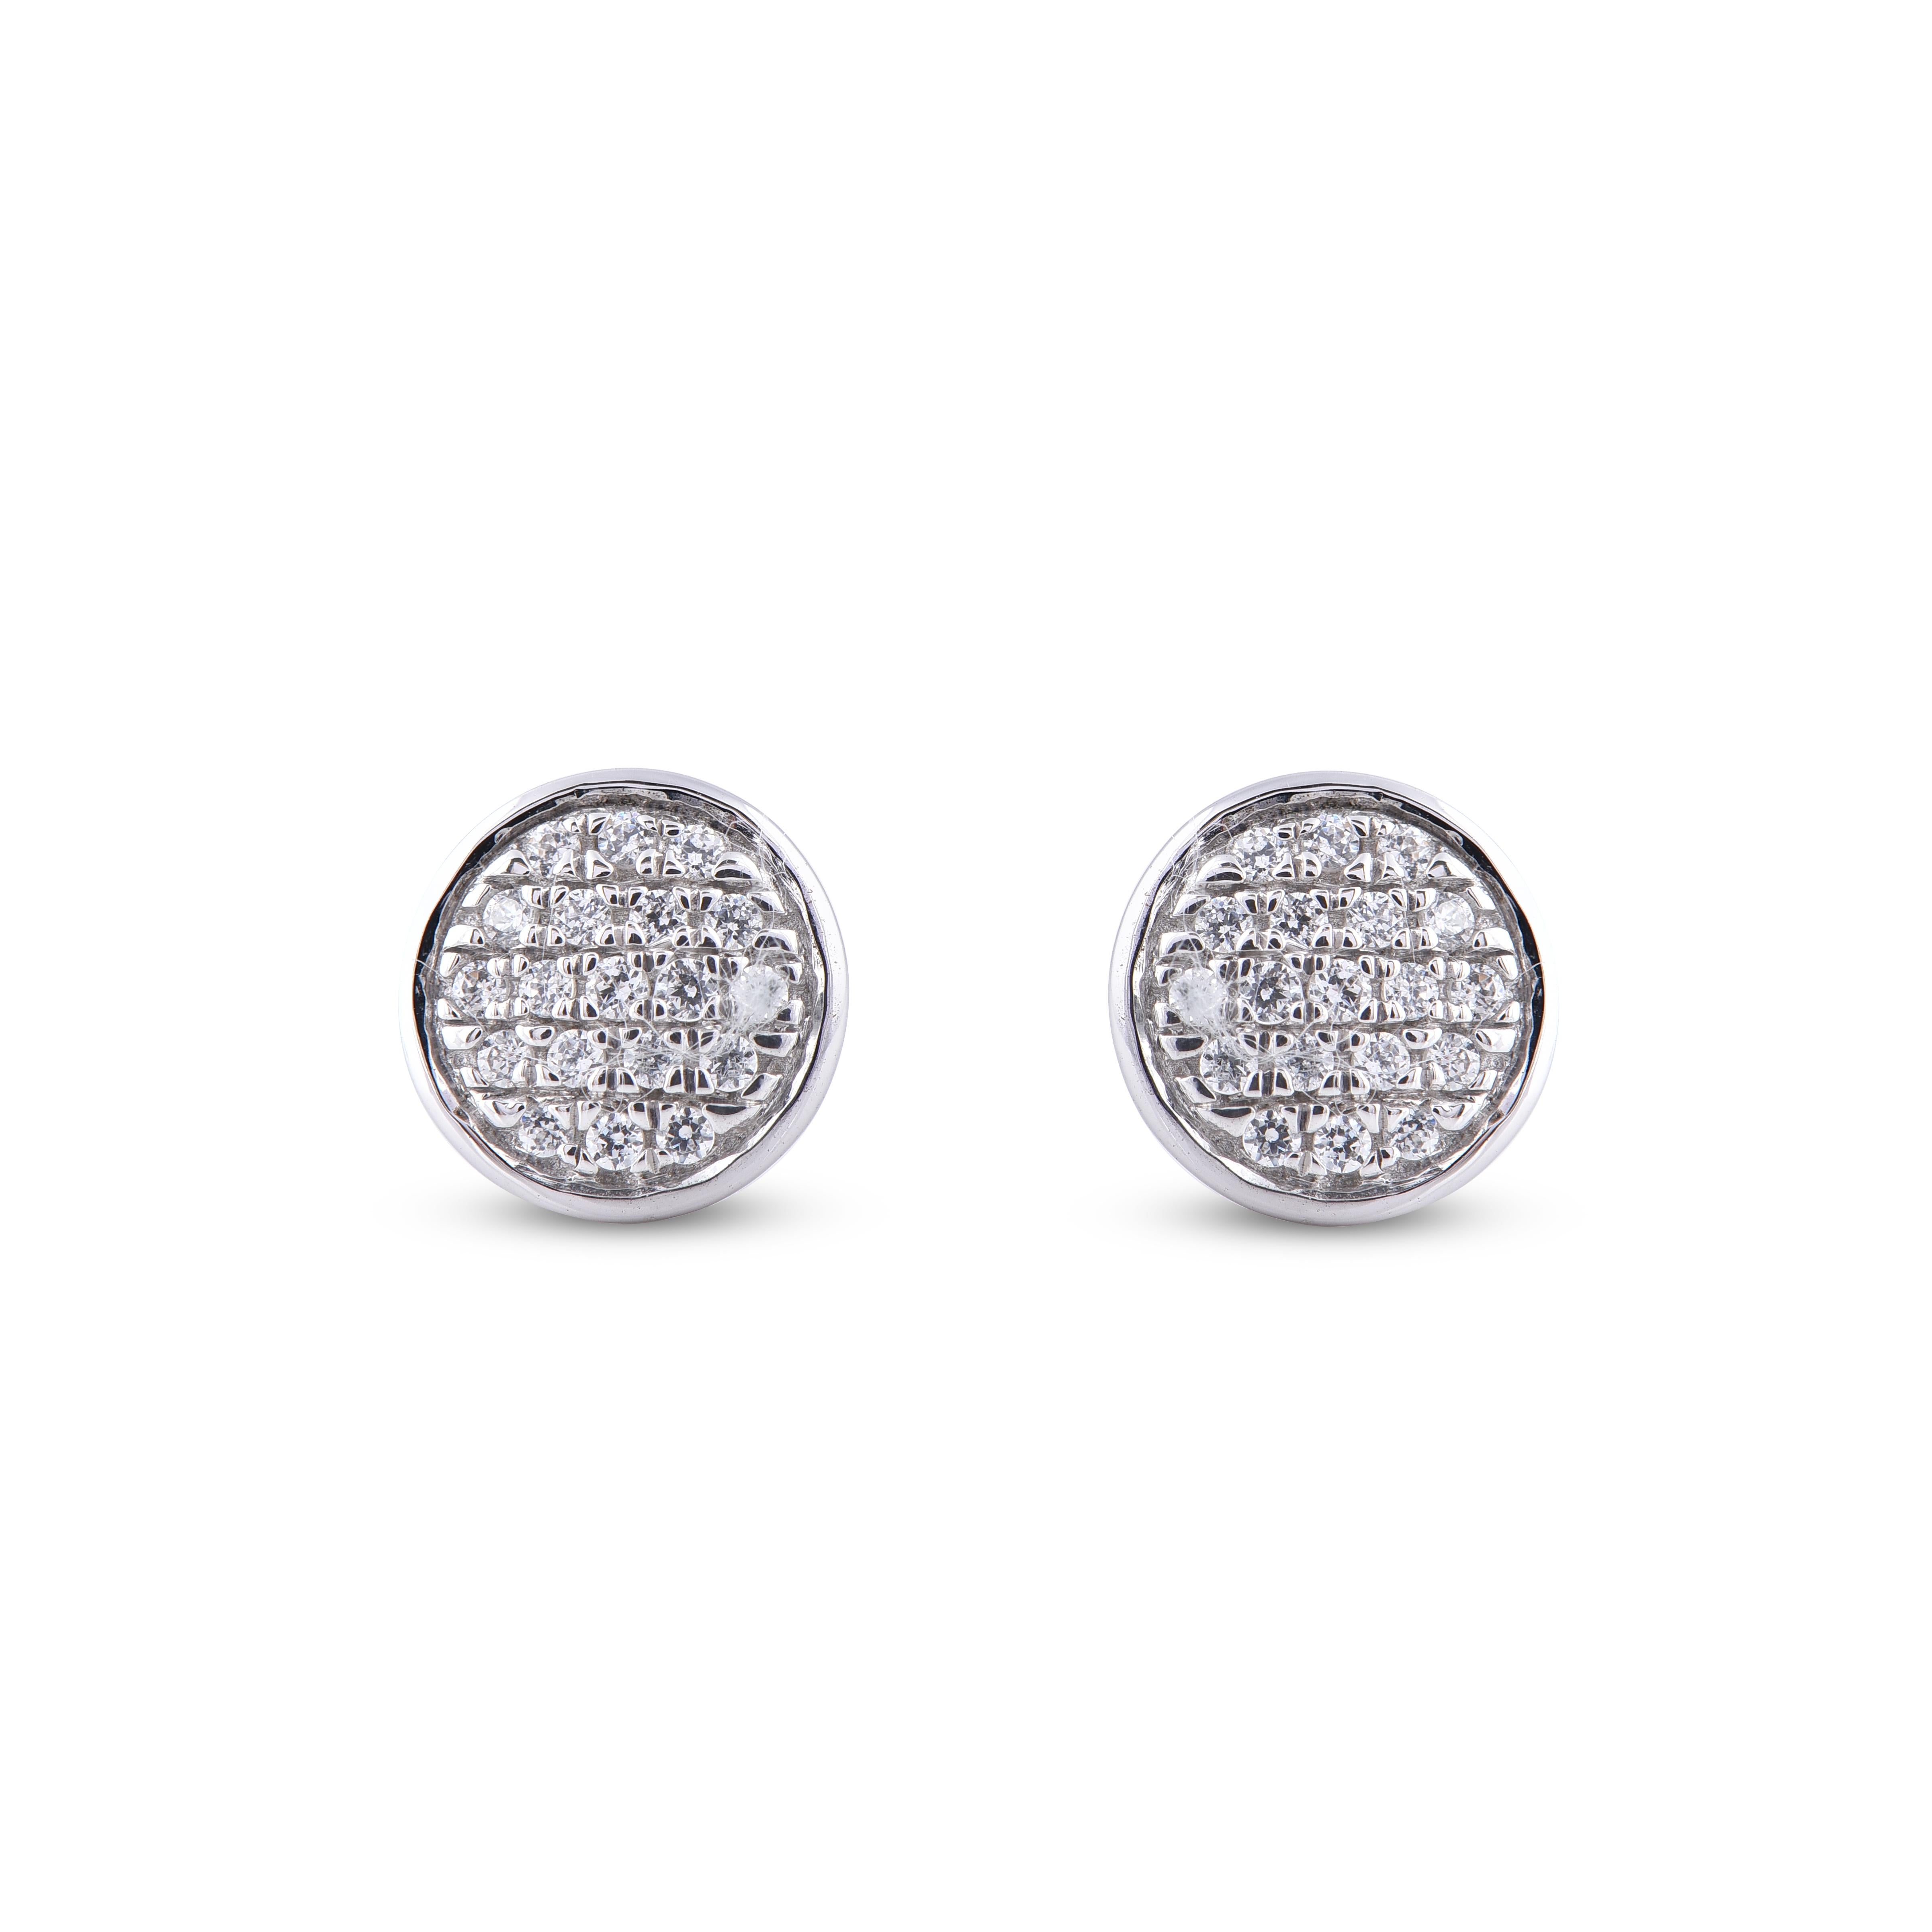 A classic look that compliments any attire, these  design diamond earrings are a stunning addition to your jewelry box. Studded with 38 round diamonds set in pave setting, shimmers in H-I color I2 clarity and crafted in 14 karat white gold.